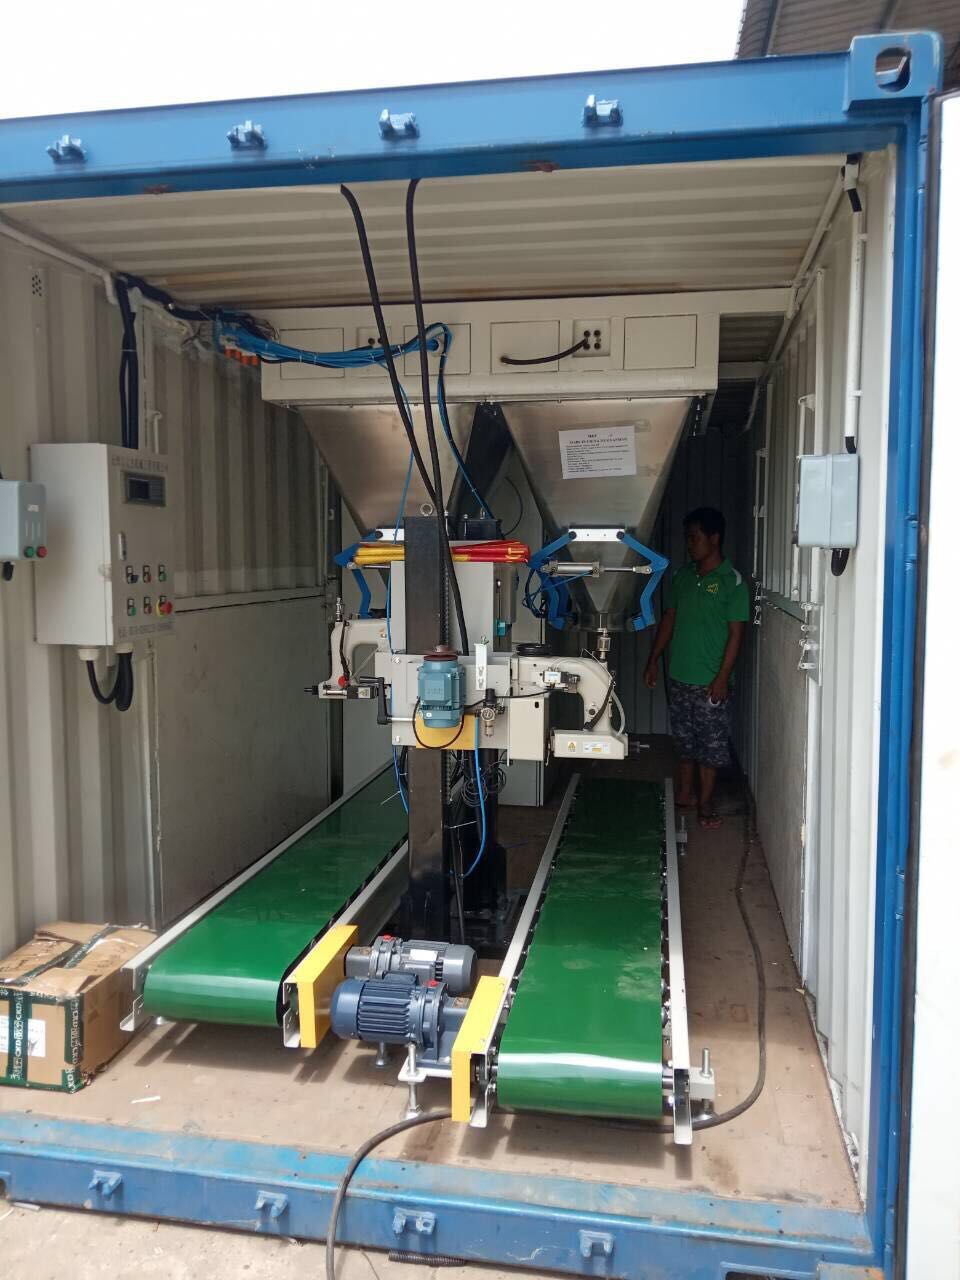 MOBILE SAND BAGGING MACHINES containerized bagging system Mobile Bagging Unit MOBILE BAGGING MACHINES for Grains, pulses, iodised salts, sugar Containerised bagging system